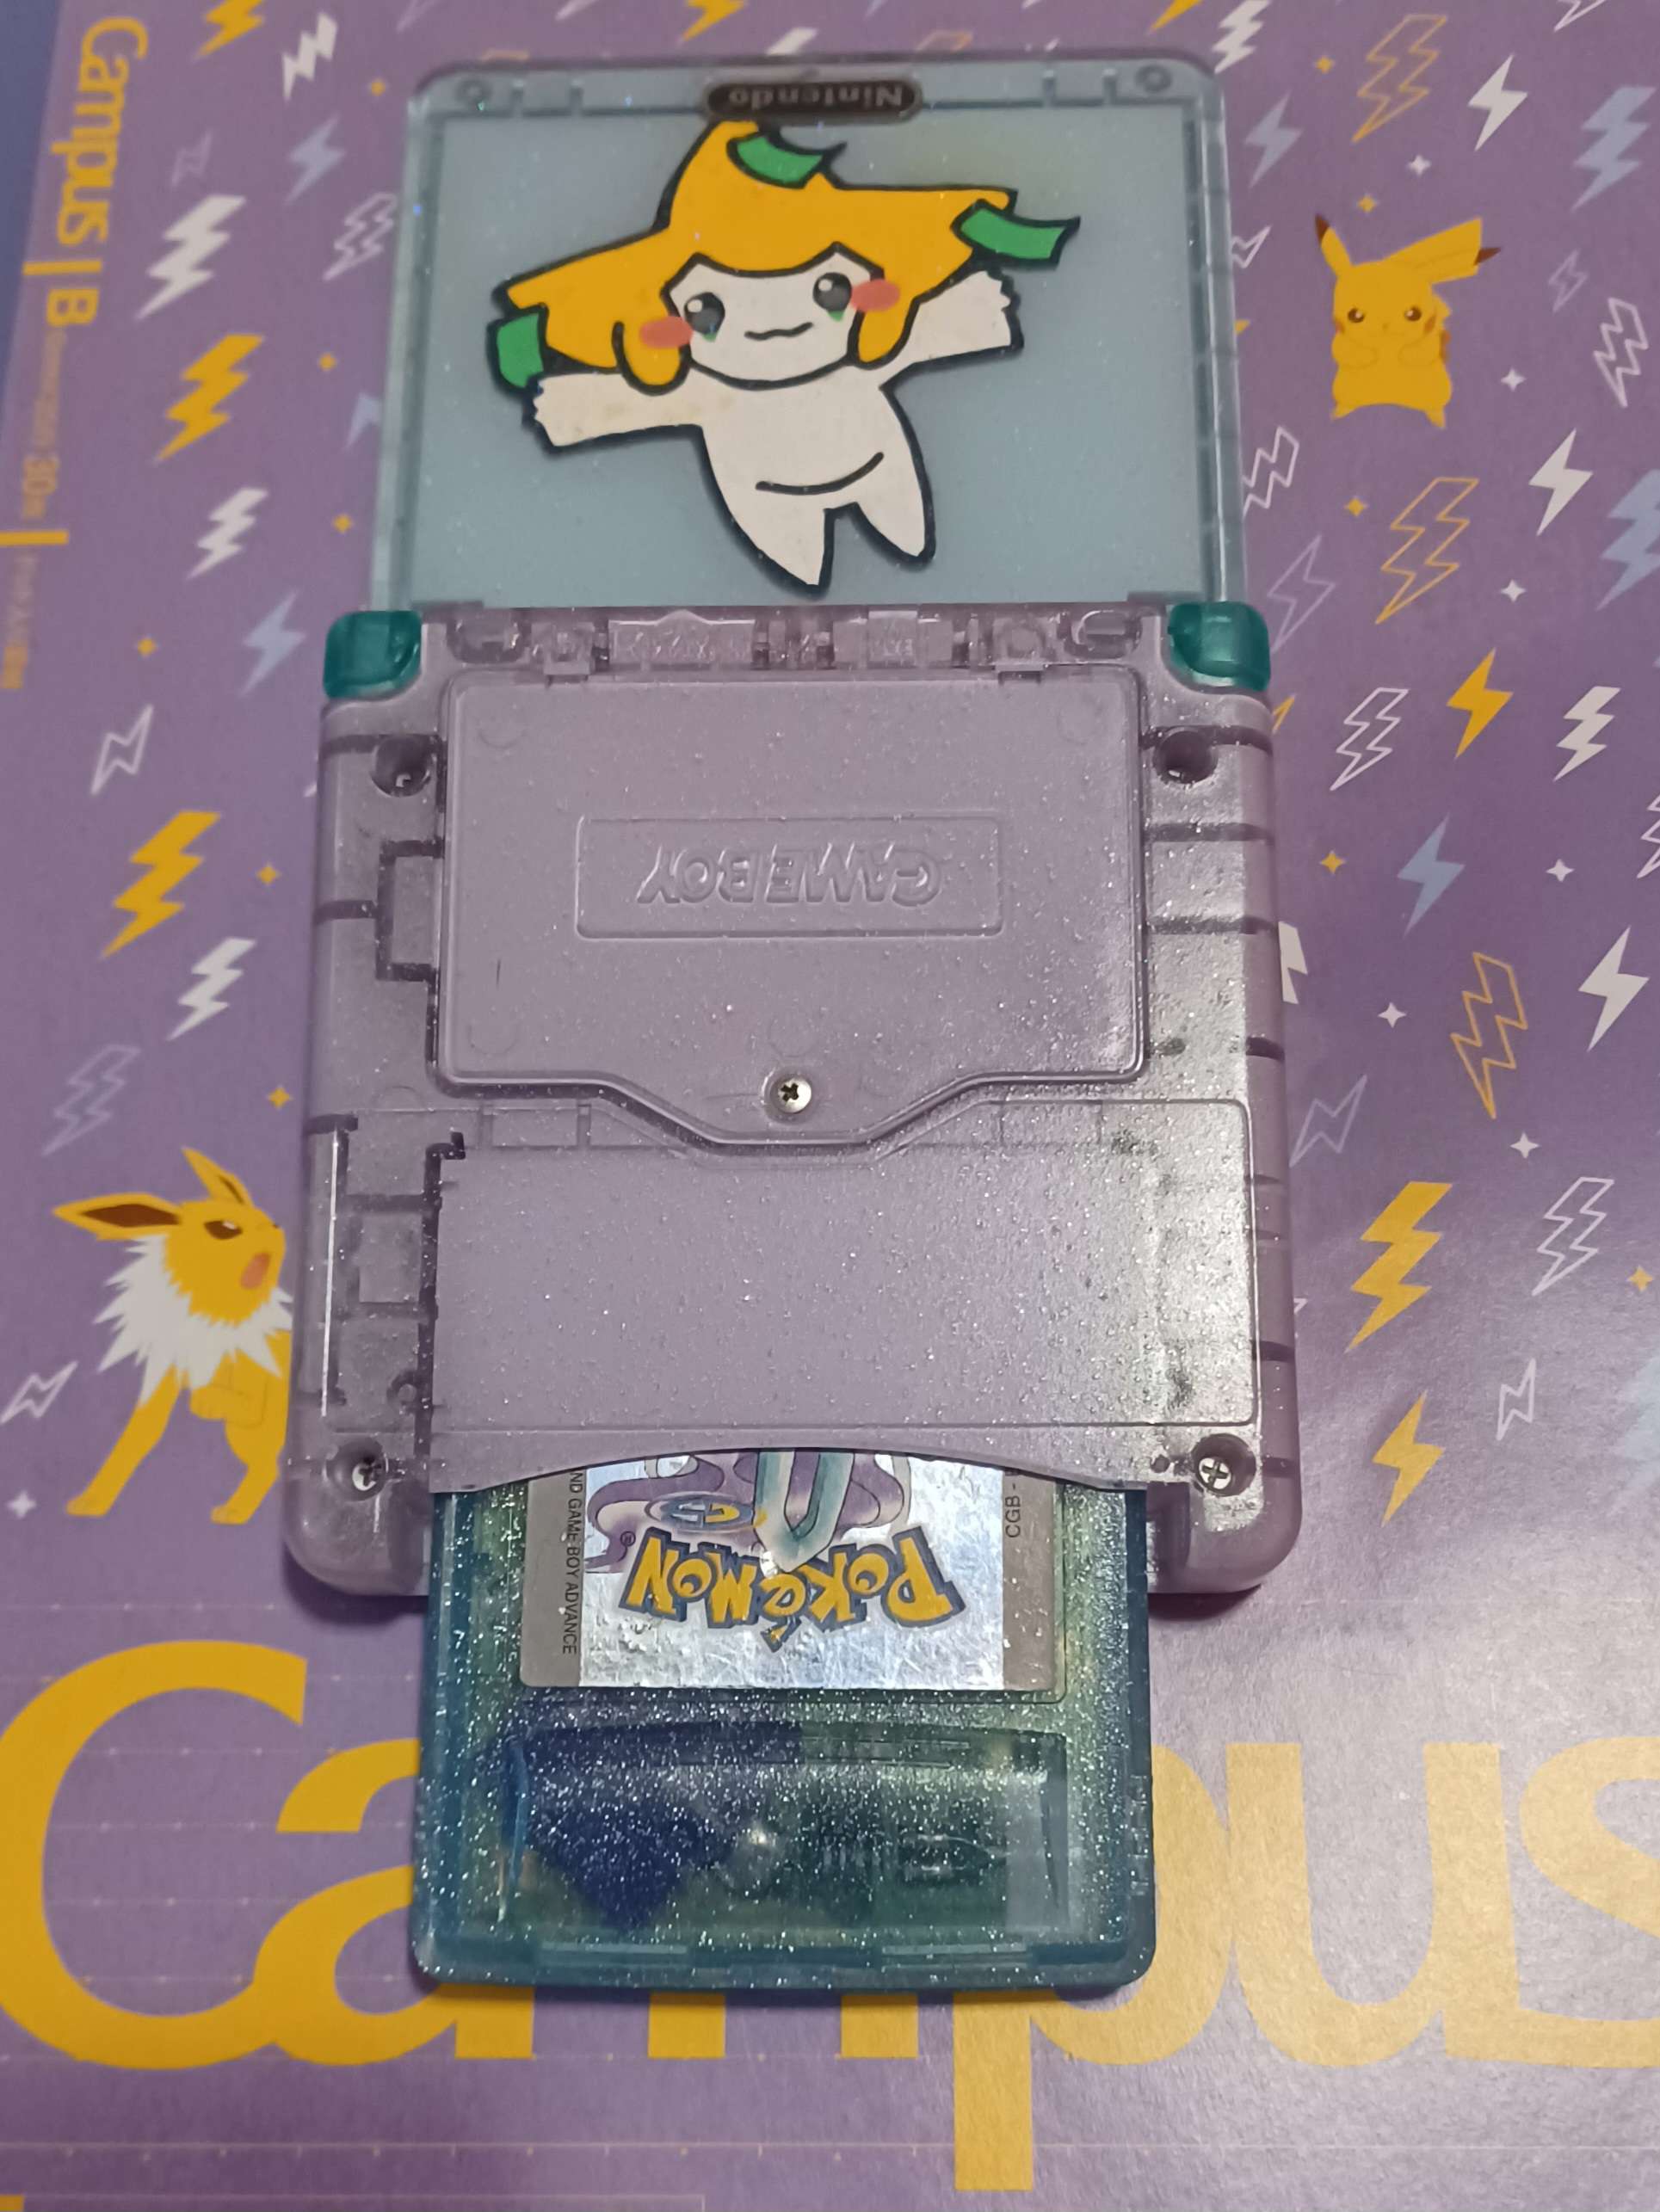 a GBA SP, the top half pastel blue with jirachi, and the bottom half pastel purple. the buttons are the same translucent teal as the cartridge in the slot, pokemon crystal.